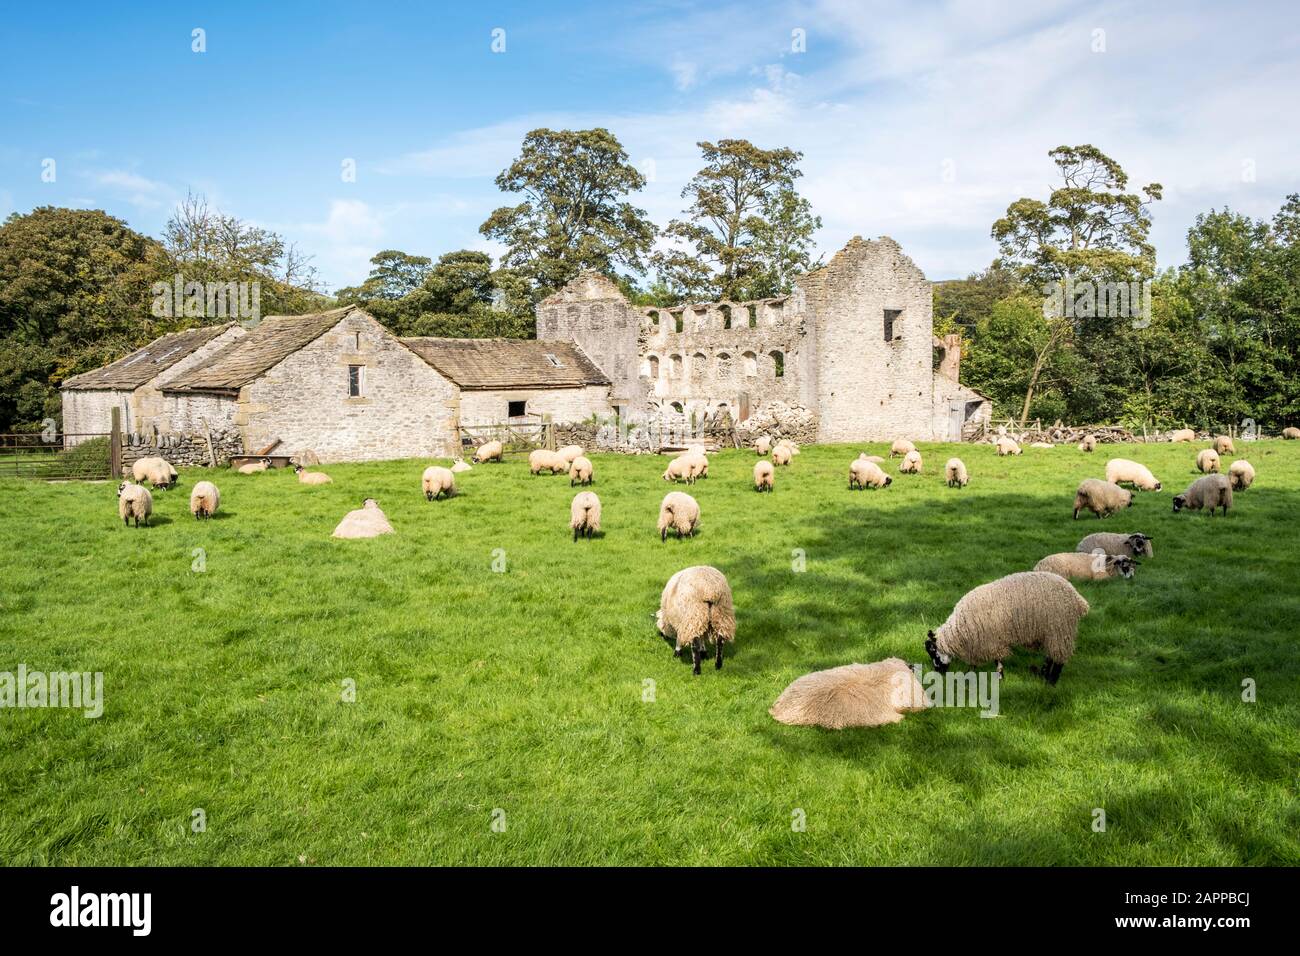 Sheep grazing in Autumn on a field near old buildings, Castleton, Derbyshire, England, UK Stock Photo